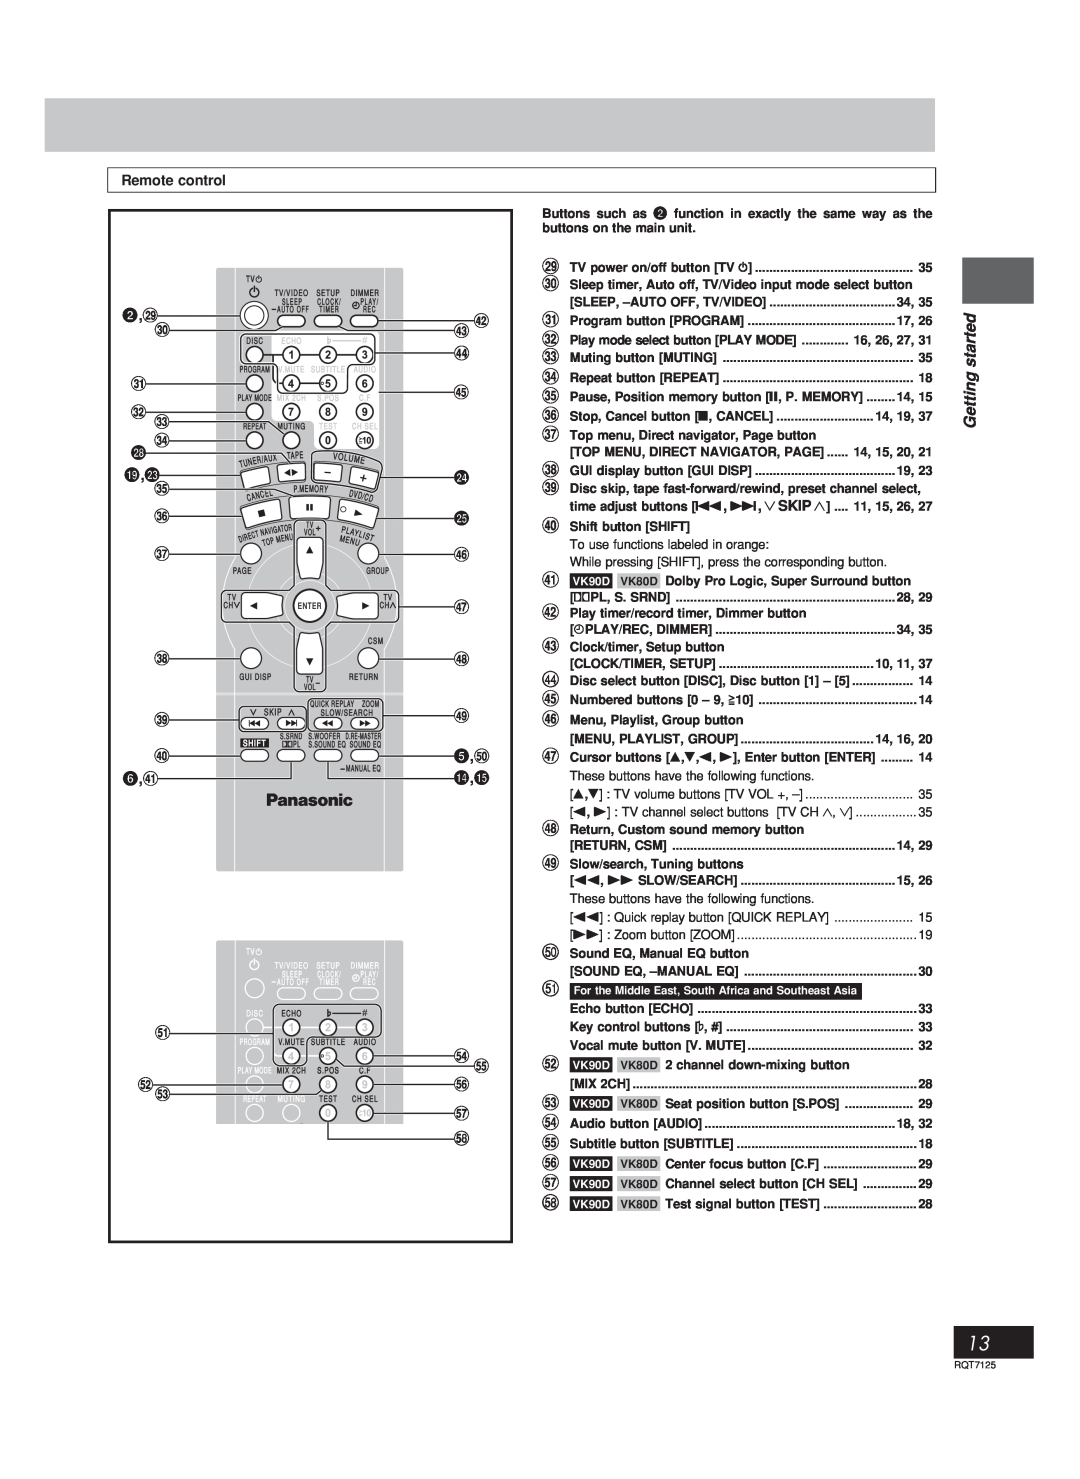 Panasonic SC-VK80D, SC-VK90D, SC-VK70D Getting started, Control reference guide, Remote control, 6 7, 5 % 